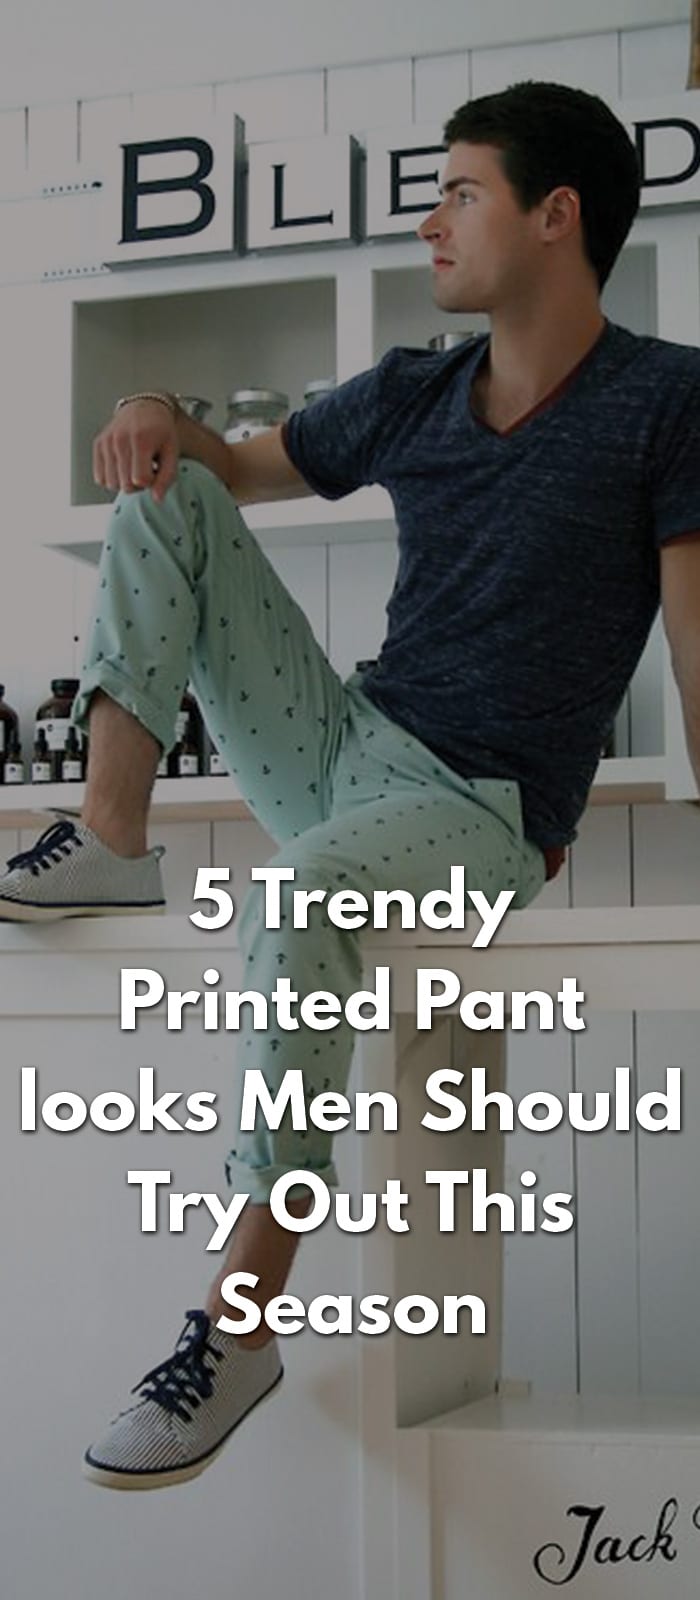 5 Trendy Printed Pant looks Men Should Try Out This Season